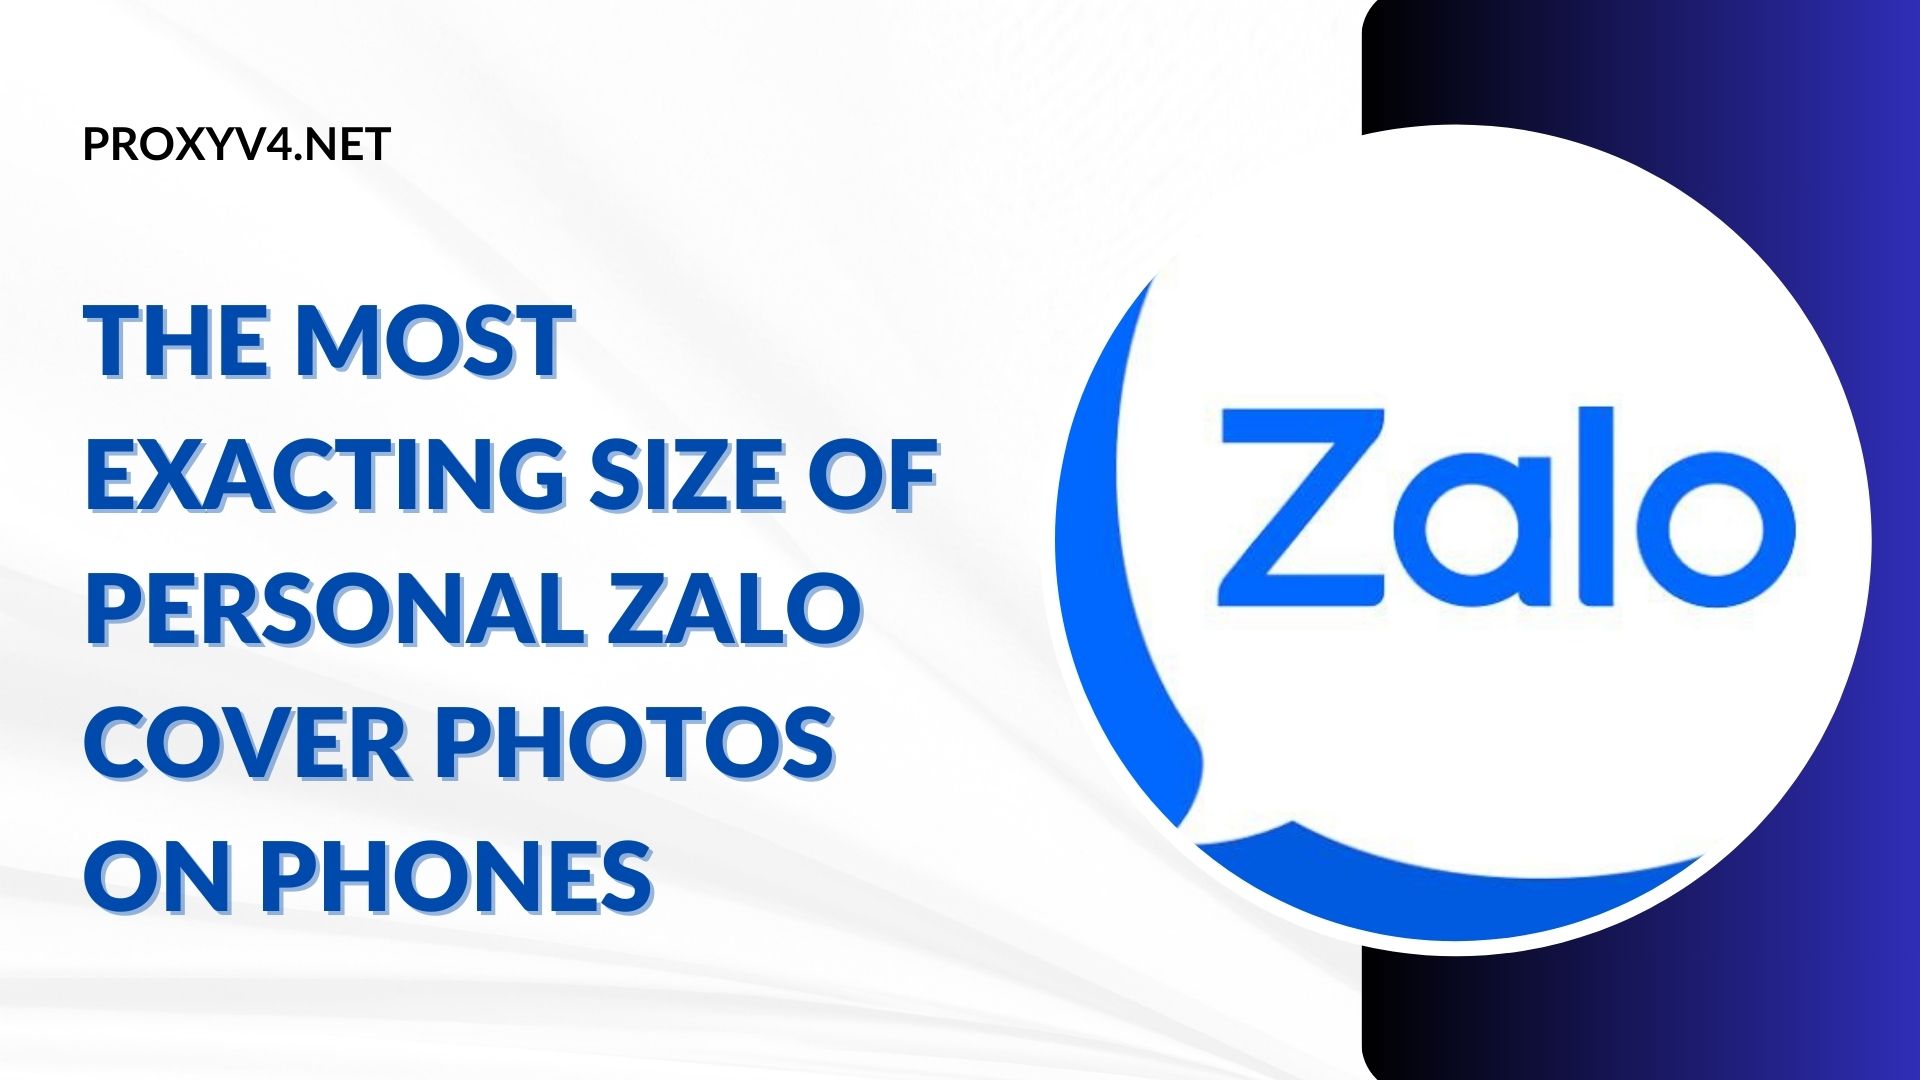 The most exacting size of Zalo cover photos on phones